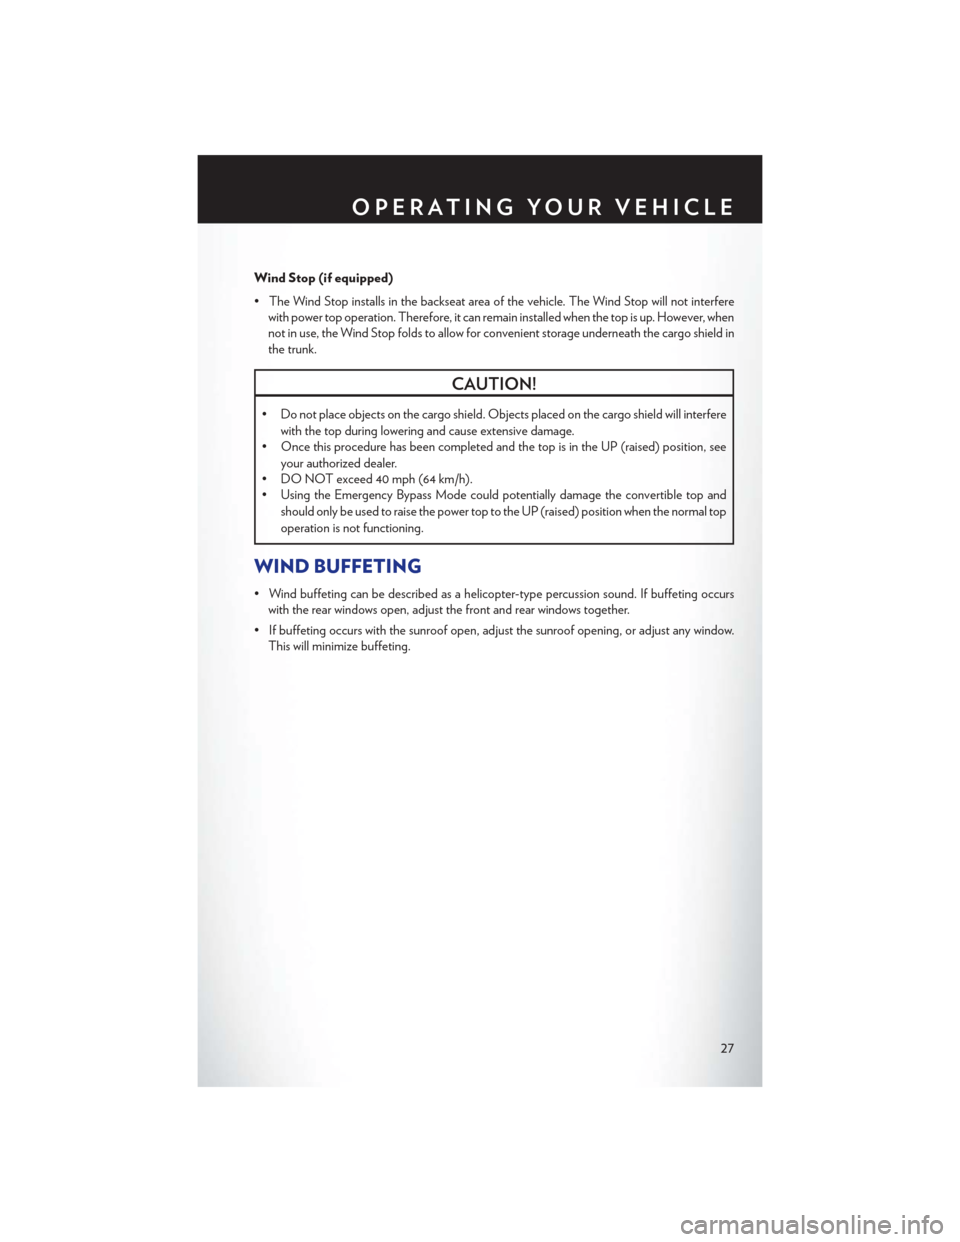 CHRYSLER 200 CONVERTIBLE 2013 1.G User Guide Wind Stop (if equipped)
• The Wind Stop installs in the backseat area of the vehicle. The Wind Stop will not interferewith power top operation. Therefore, it can remain installed when the top is up.